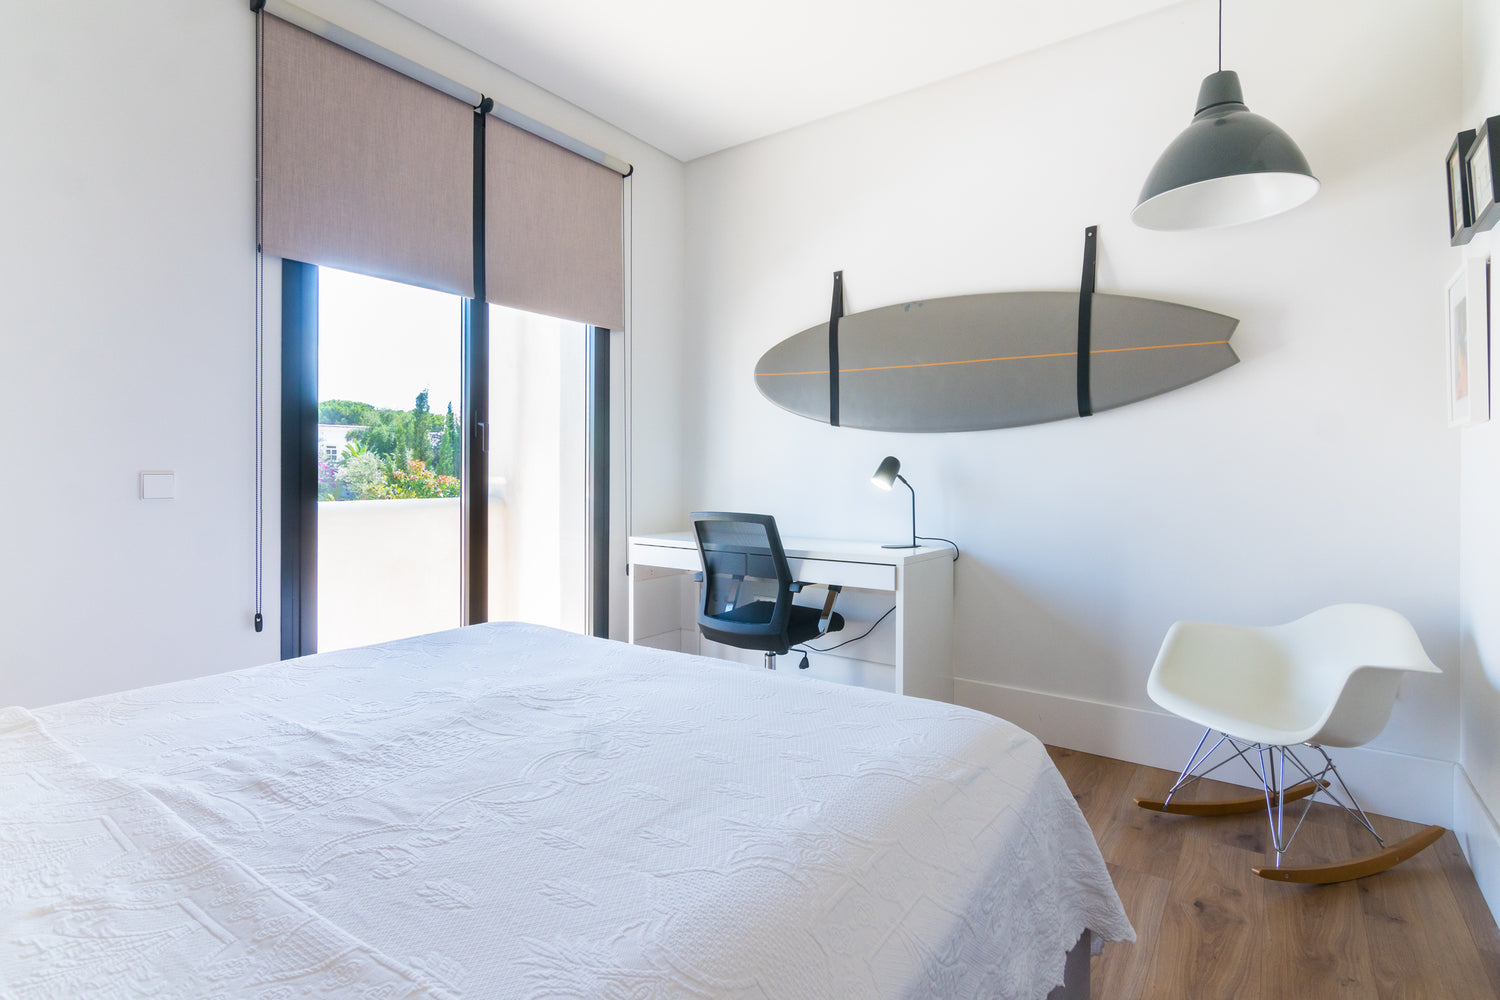 Third bedroom suite of Villa, Marbella luxury Beach House short term rental, located on the beach side at Marbella´s exclusive Golden Mile just steps from the sea 